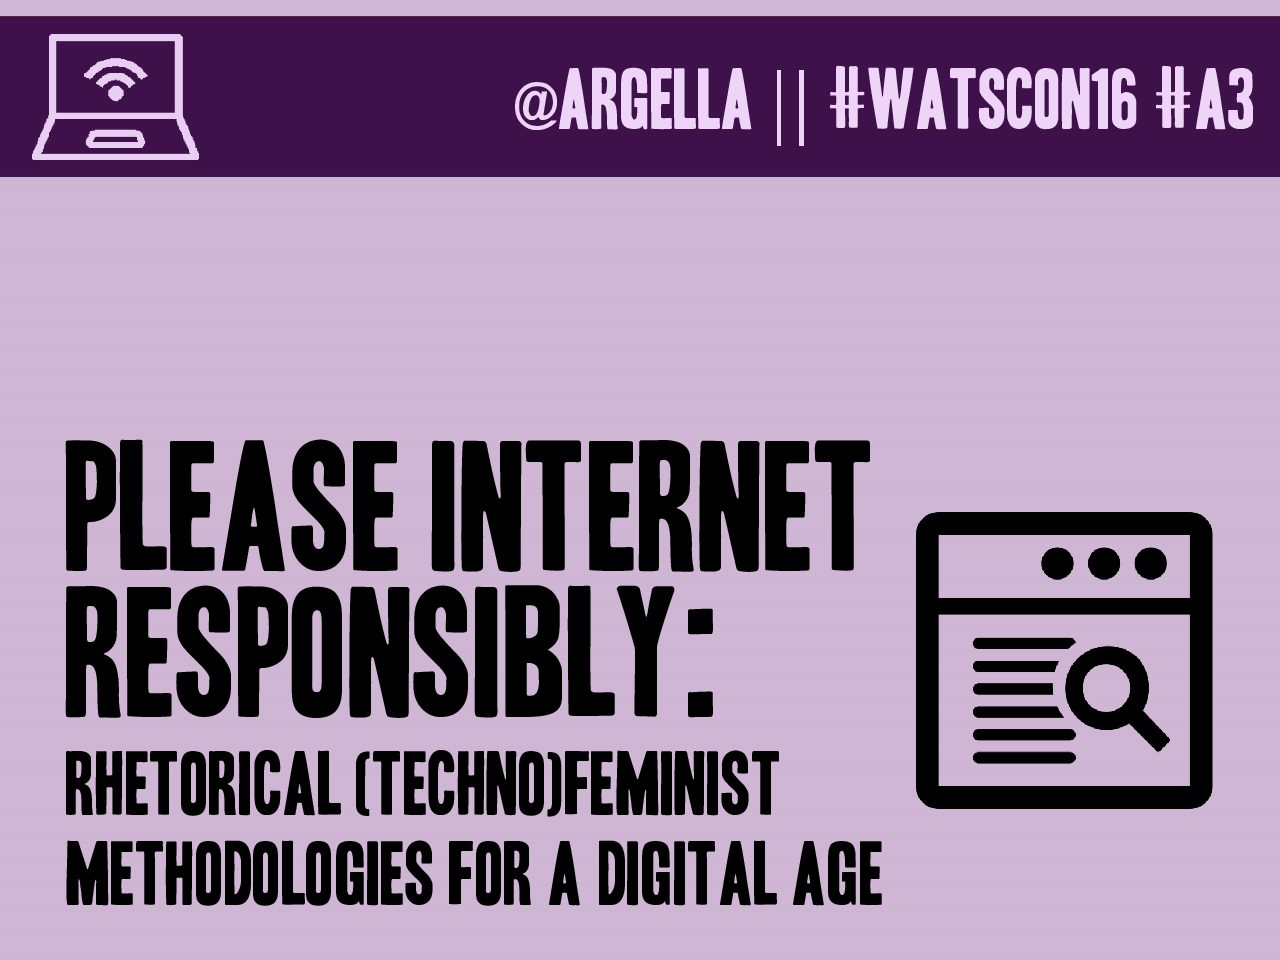 Header image for the slide deck for "Please Internet Responsibly" at Watson 2016